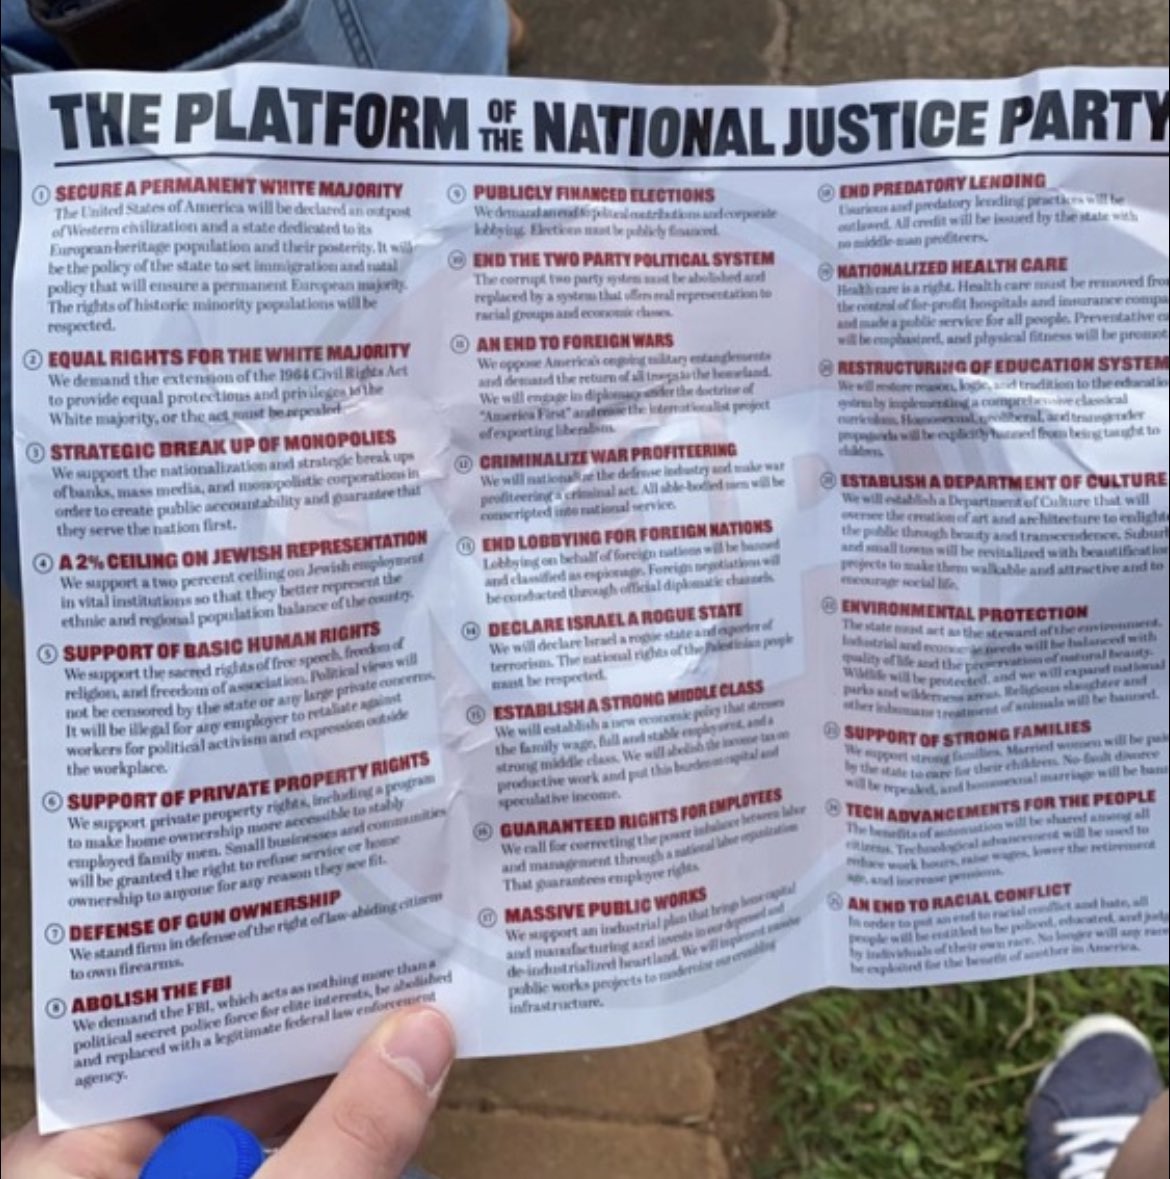 This was handed out to people in line for the Trump Rally this morning in Pickens, South Carolina.